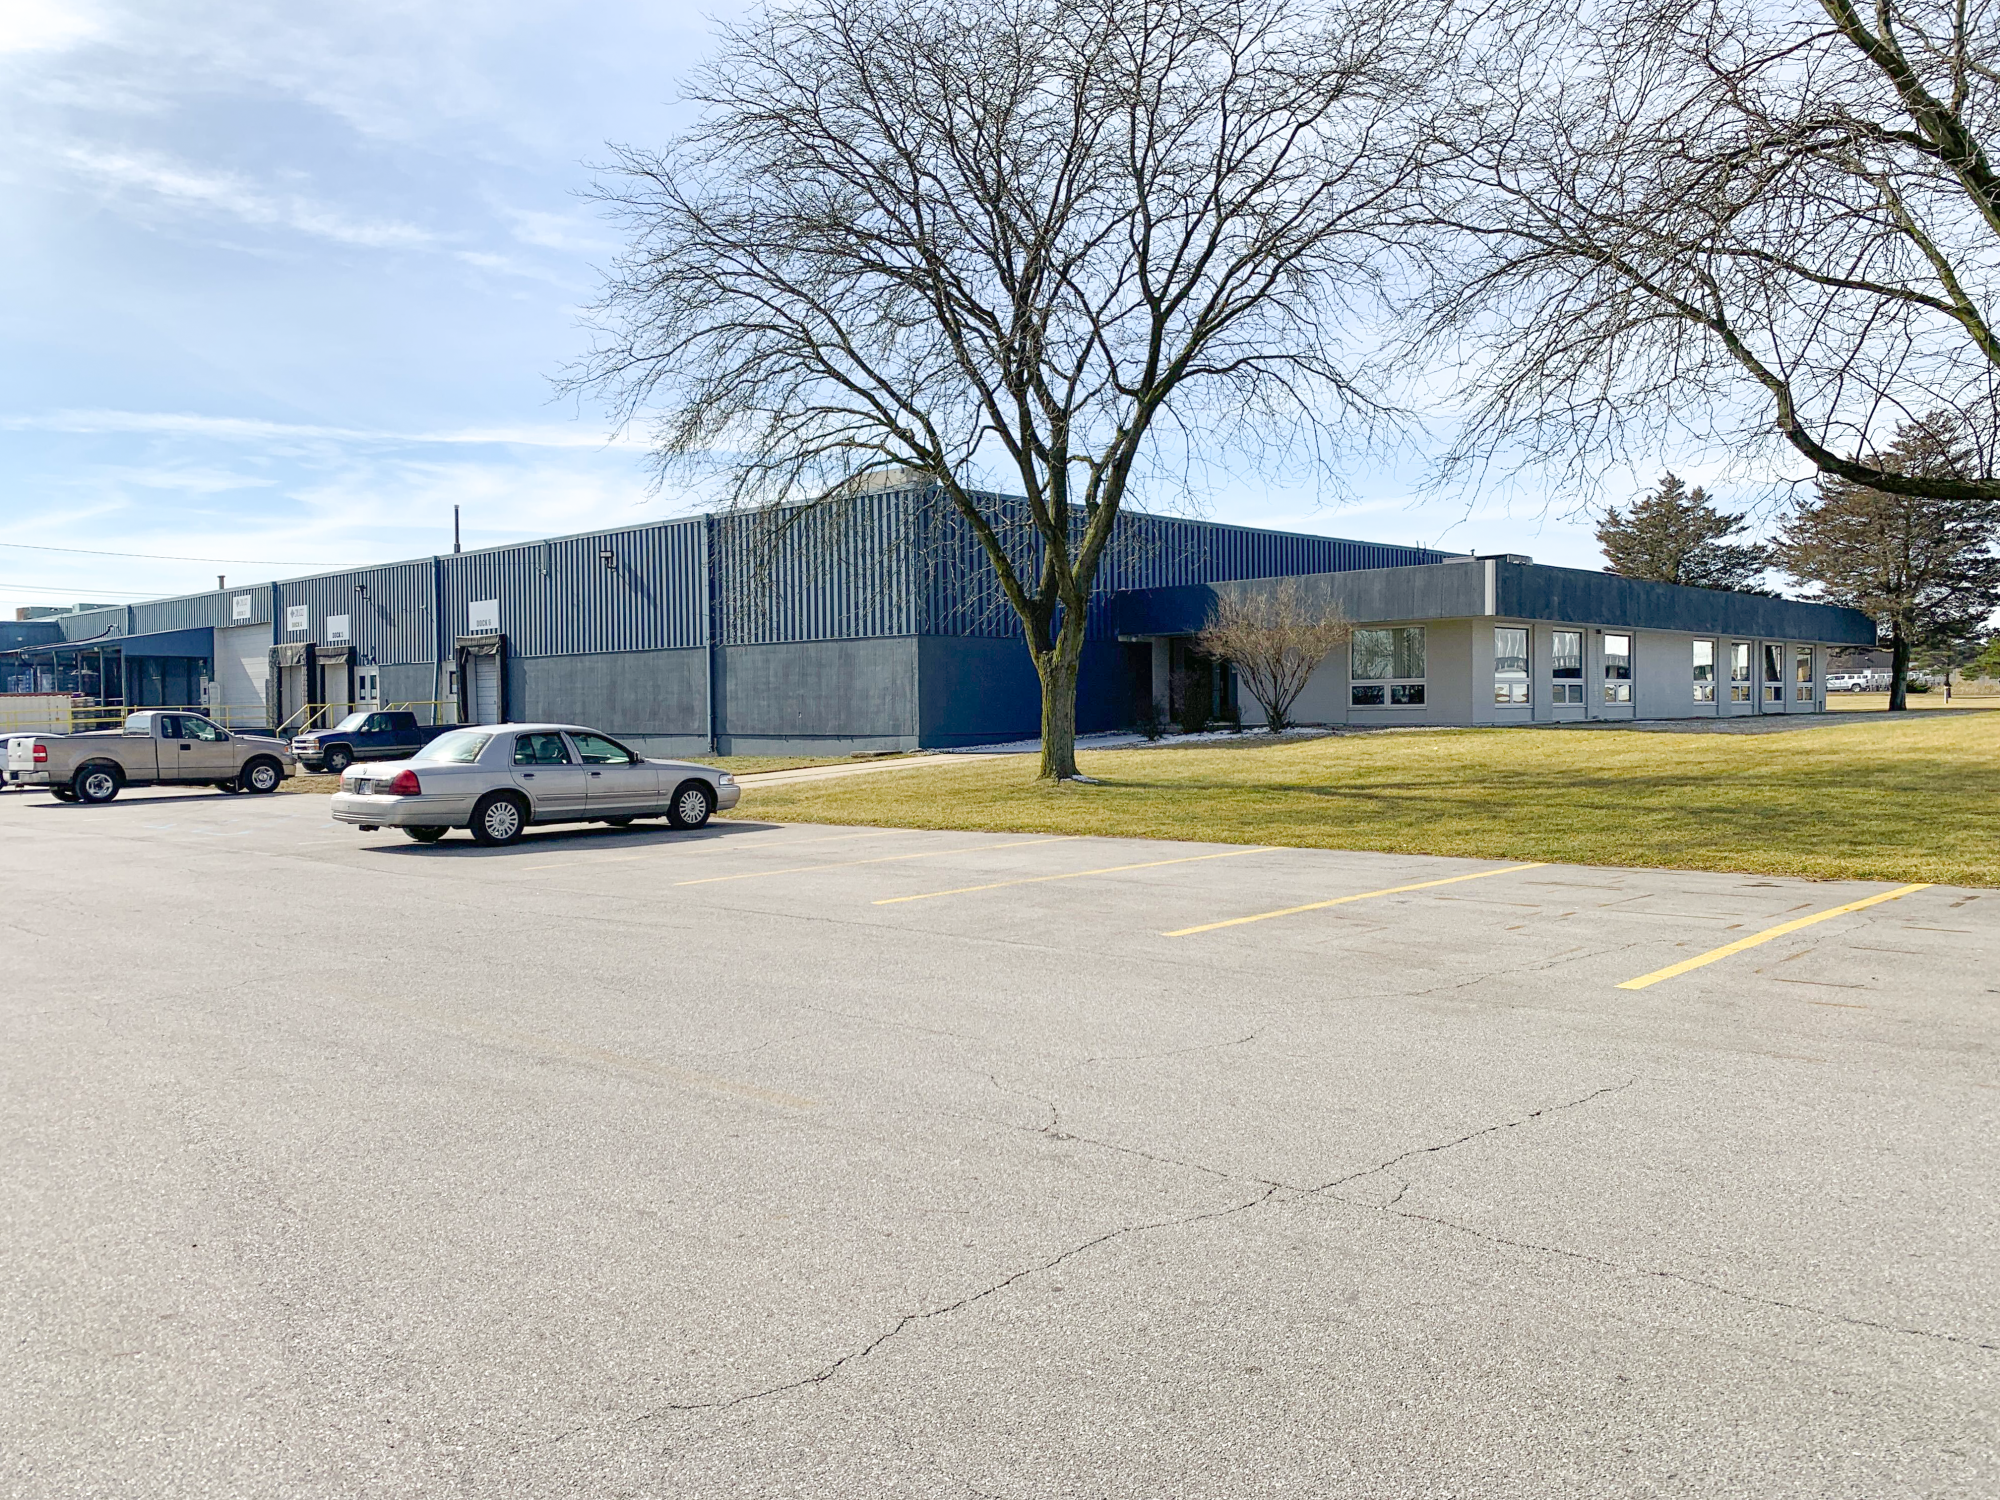 Sturges Property Group - Industrial Warehouse For Sublease In Fort Wayne Near I-69